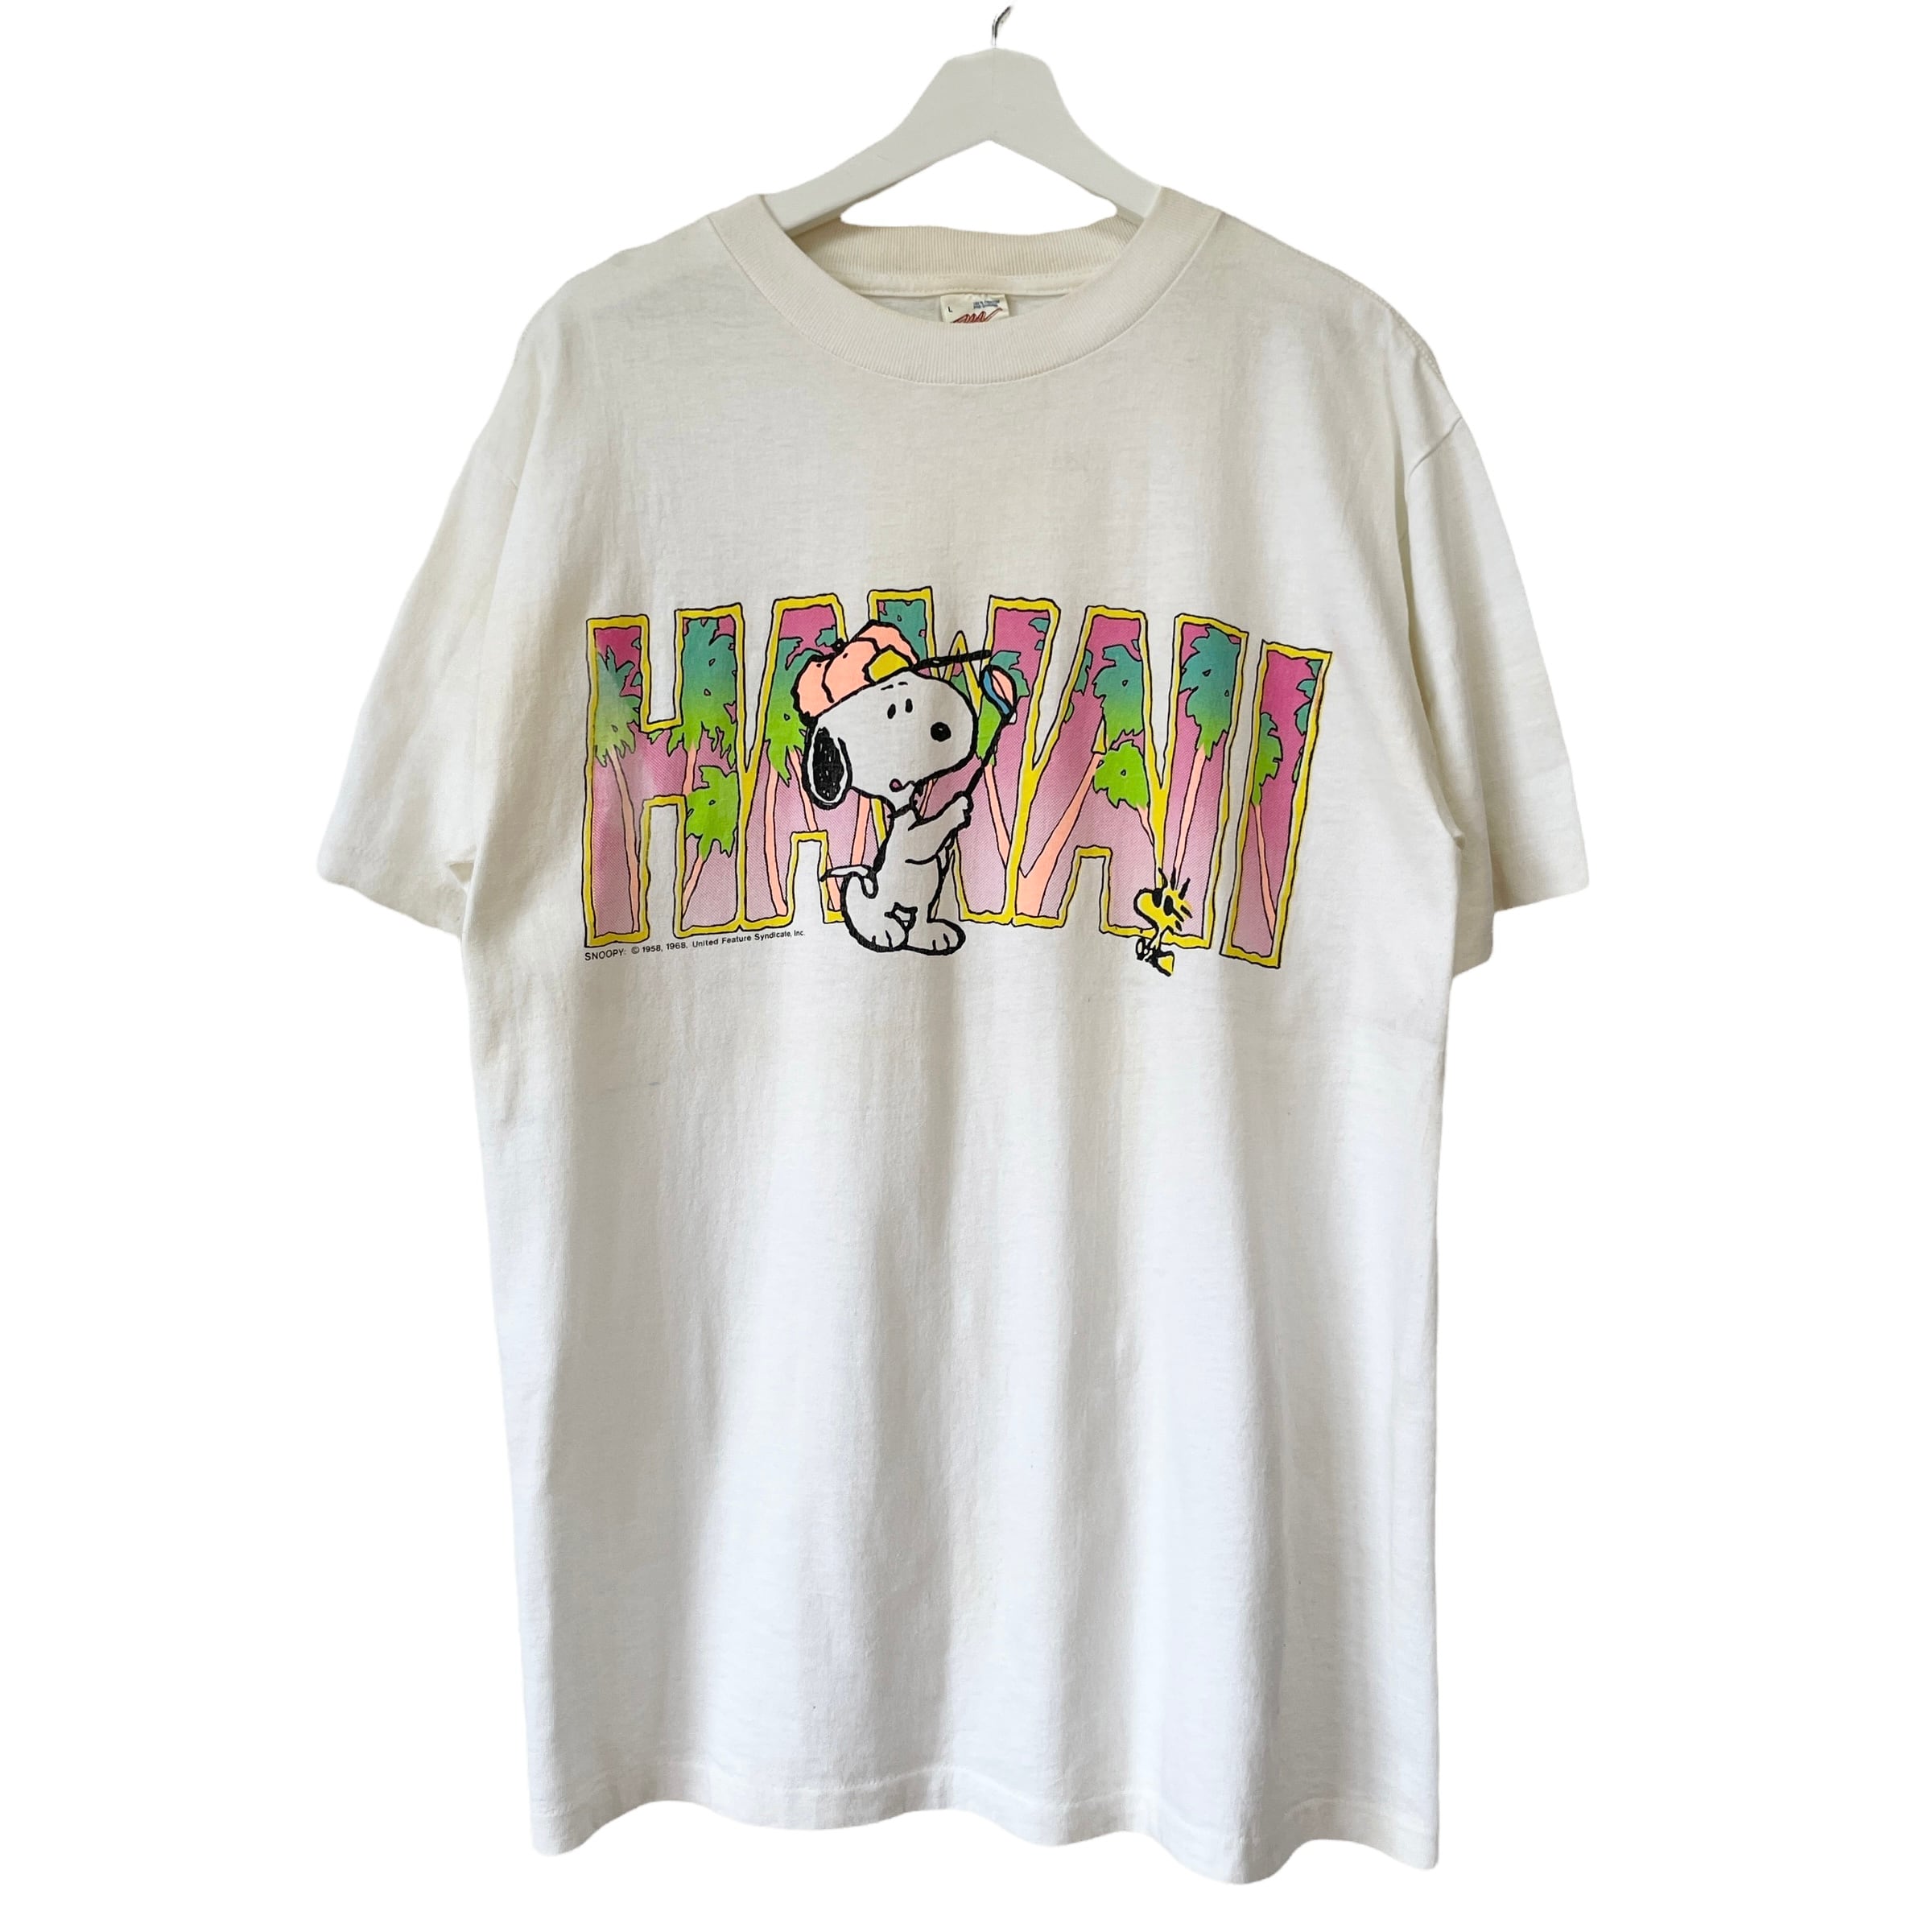 80's American Marketing Works Snoopy Hawaii Tee made in USA【L】スヌーピー